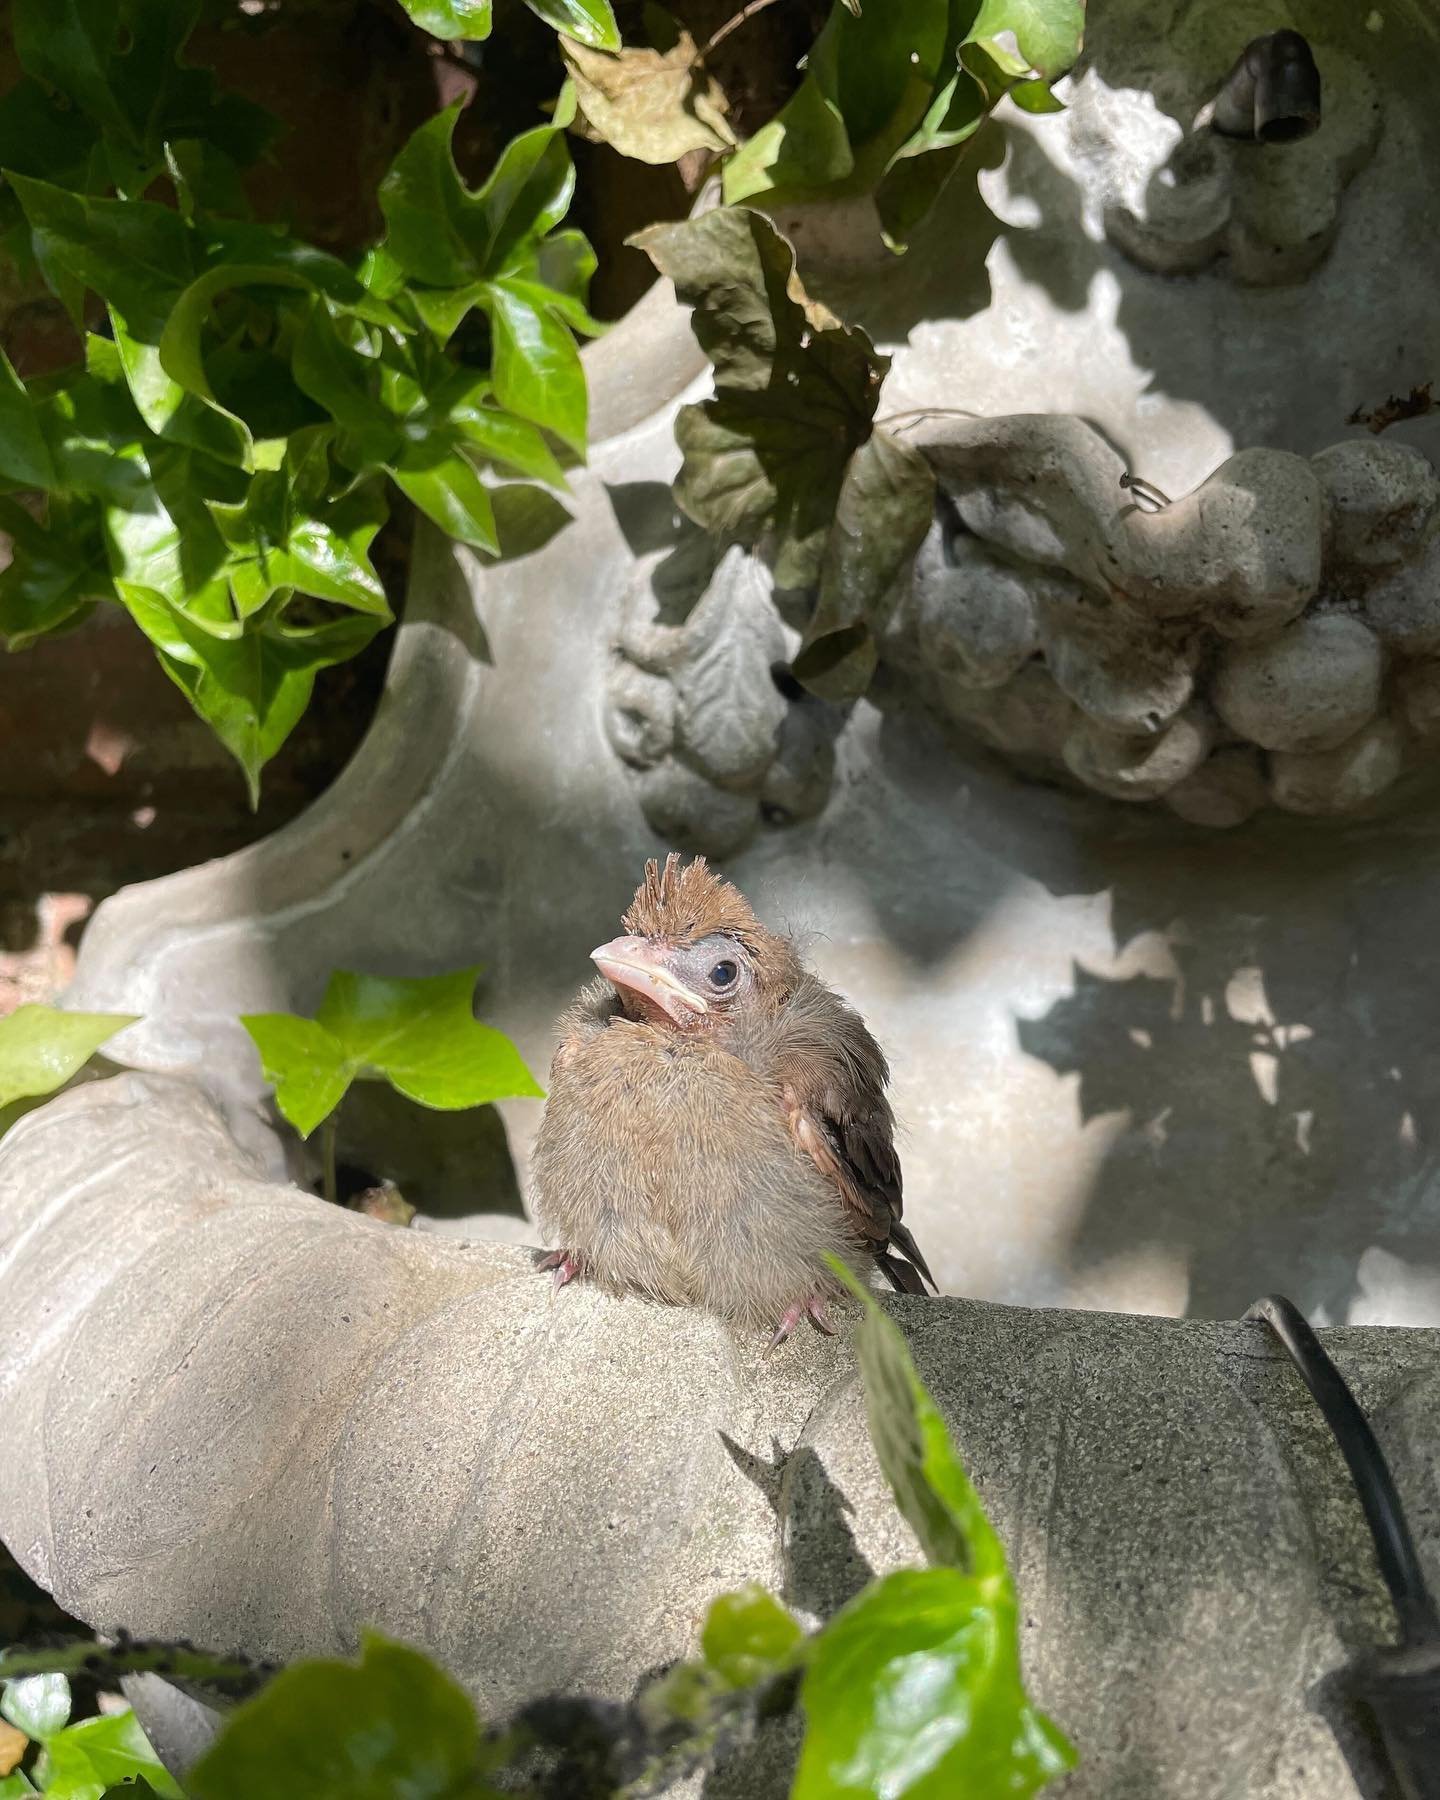 This fledgling cardinal just 🐣 in to say&hellip;

🌱💚🌏HAPPY🌍EARTH🌎DAY💚🌱

Between sowing spring crops, servicing client garden sites, and testing farm-fresh beverage recipes, our team took time to put together a playlist of planetary tunes perf